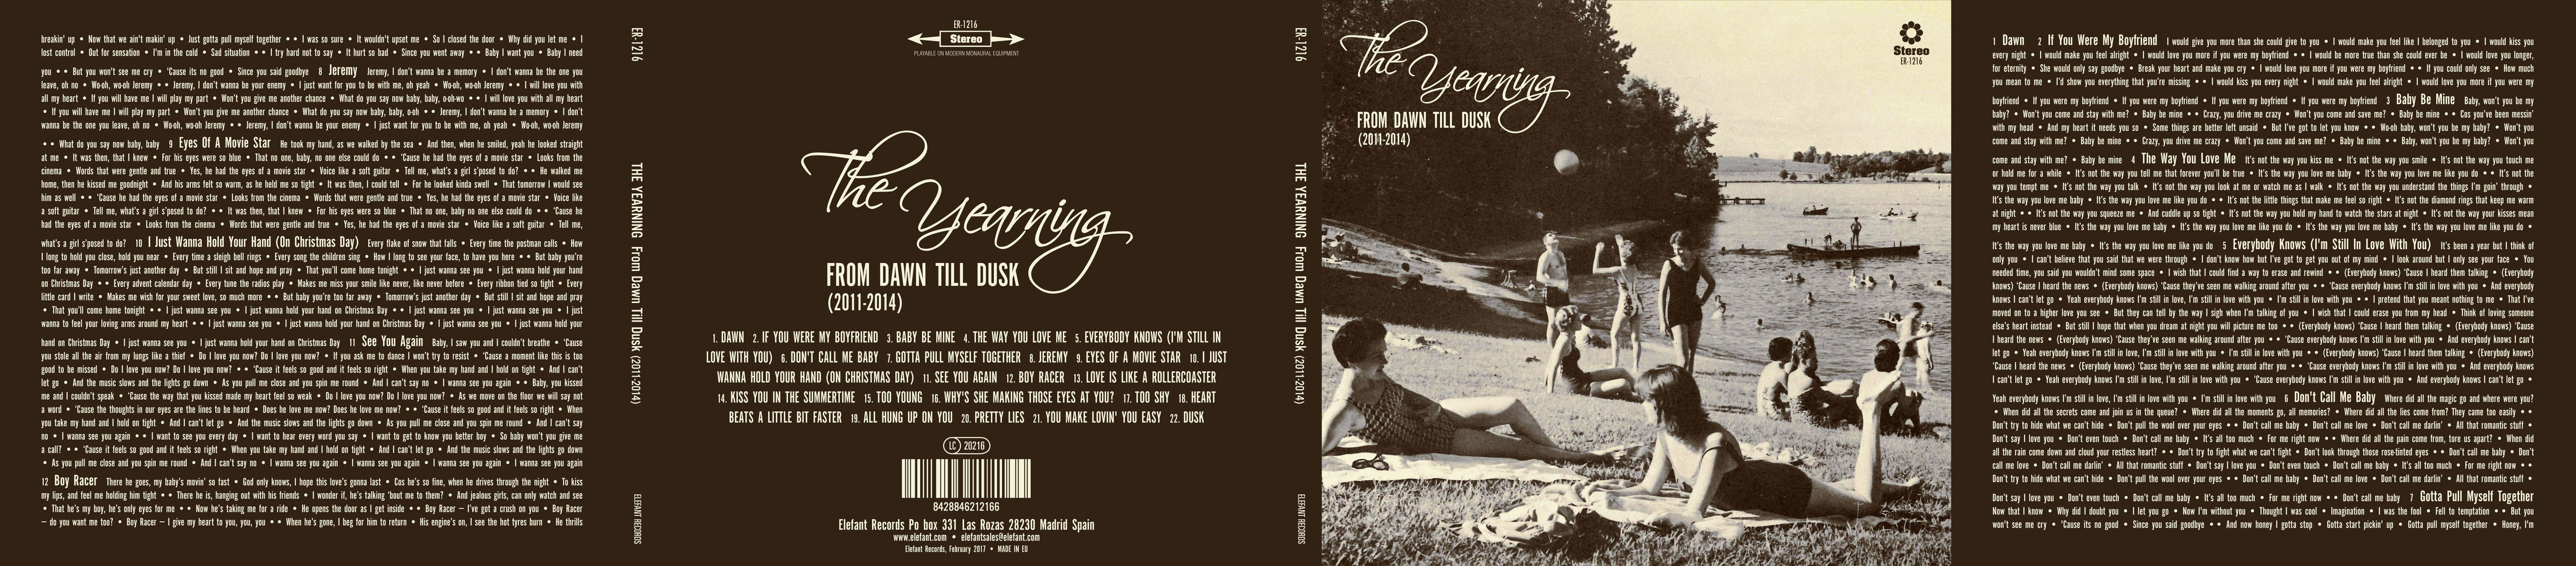 The Yearning "From Dawn Till Dusk (2011-2014)"